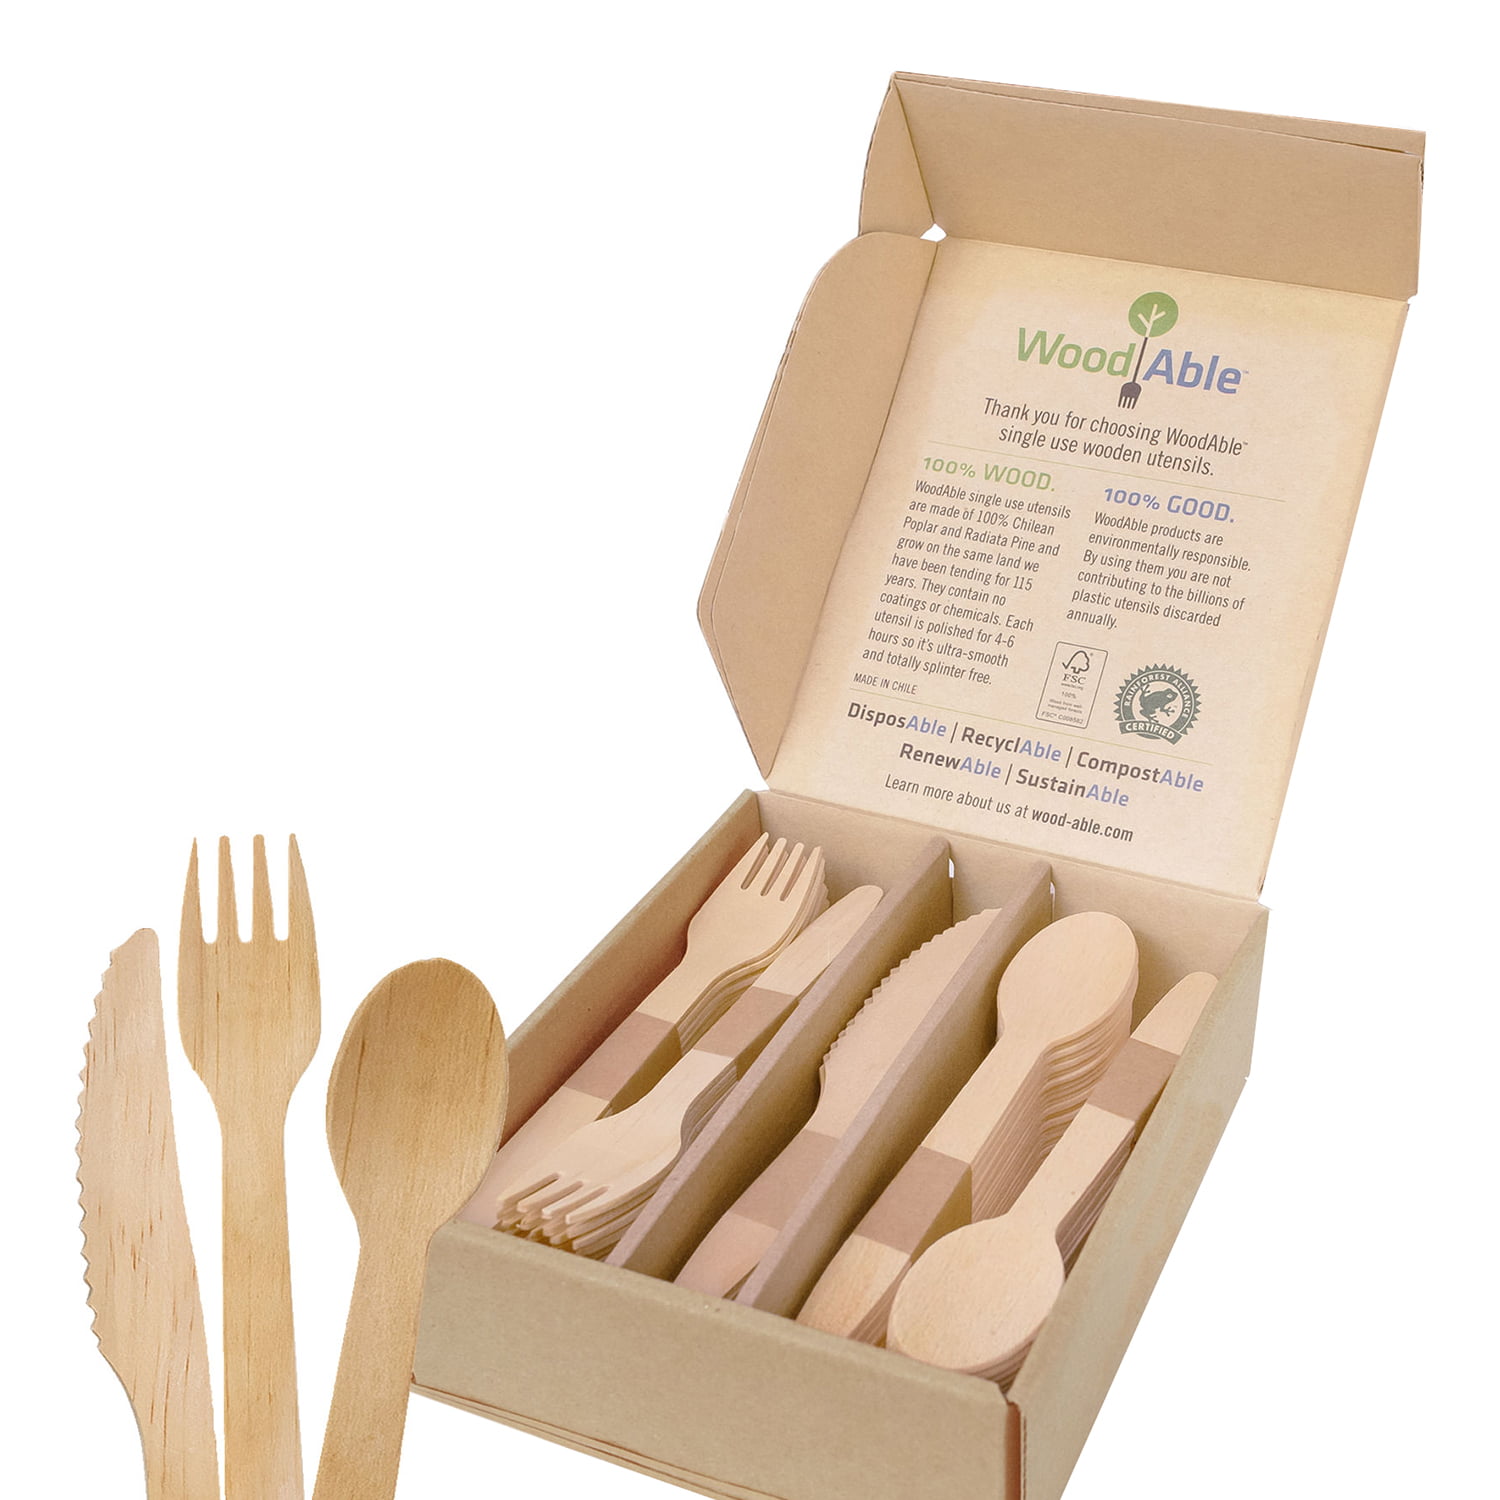 300 Wooden Cutlery Set Disposable Biodegradable Eco Friendly Recyclable Plastic Free for Picnic Party 100 Knives Pack of 300 100 Spoons 100 Forks